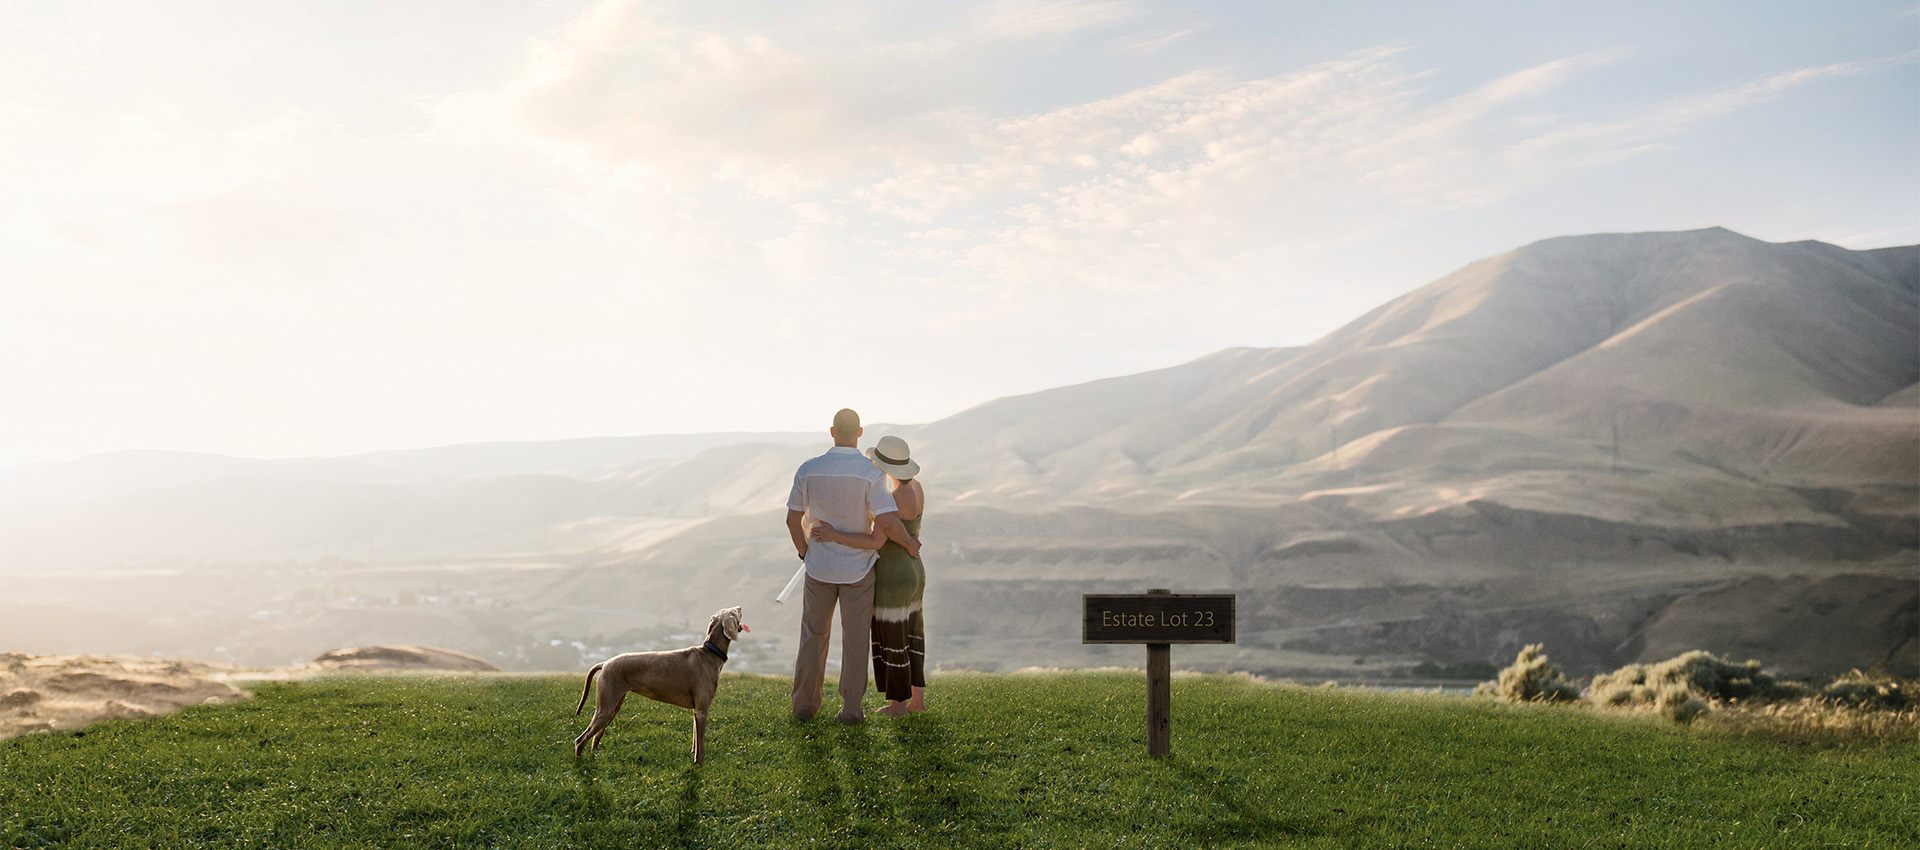 Image of a couple and dog standing overlooking the mountains